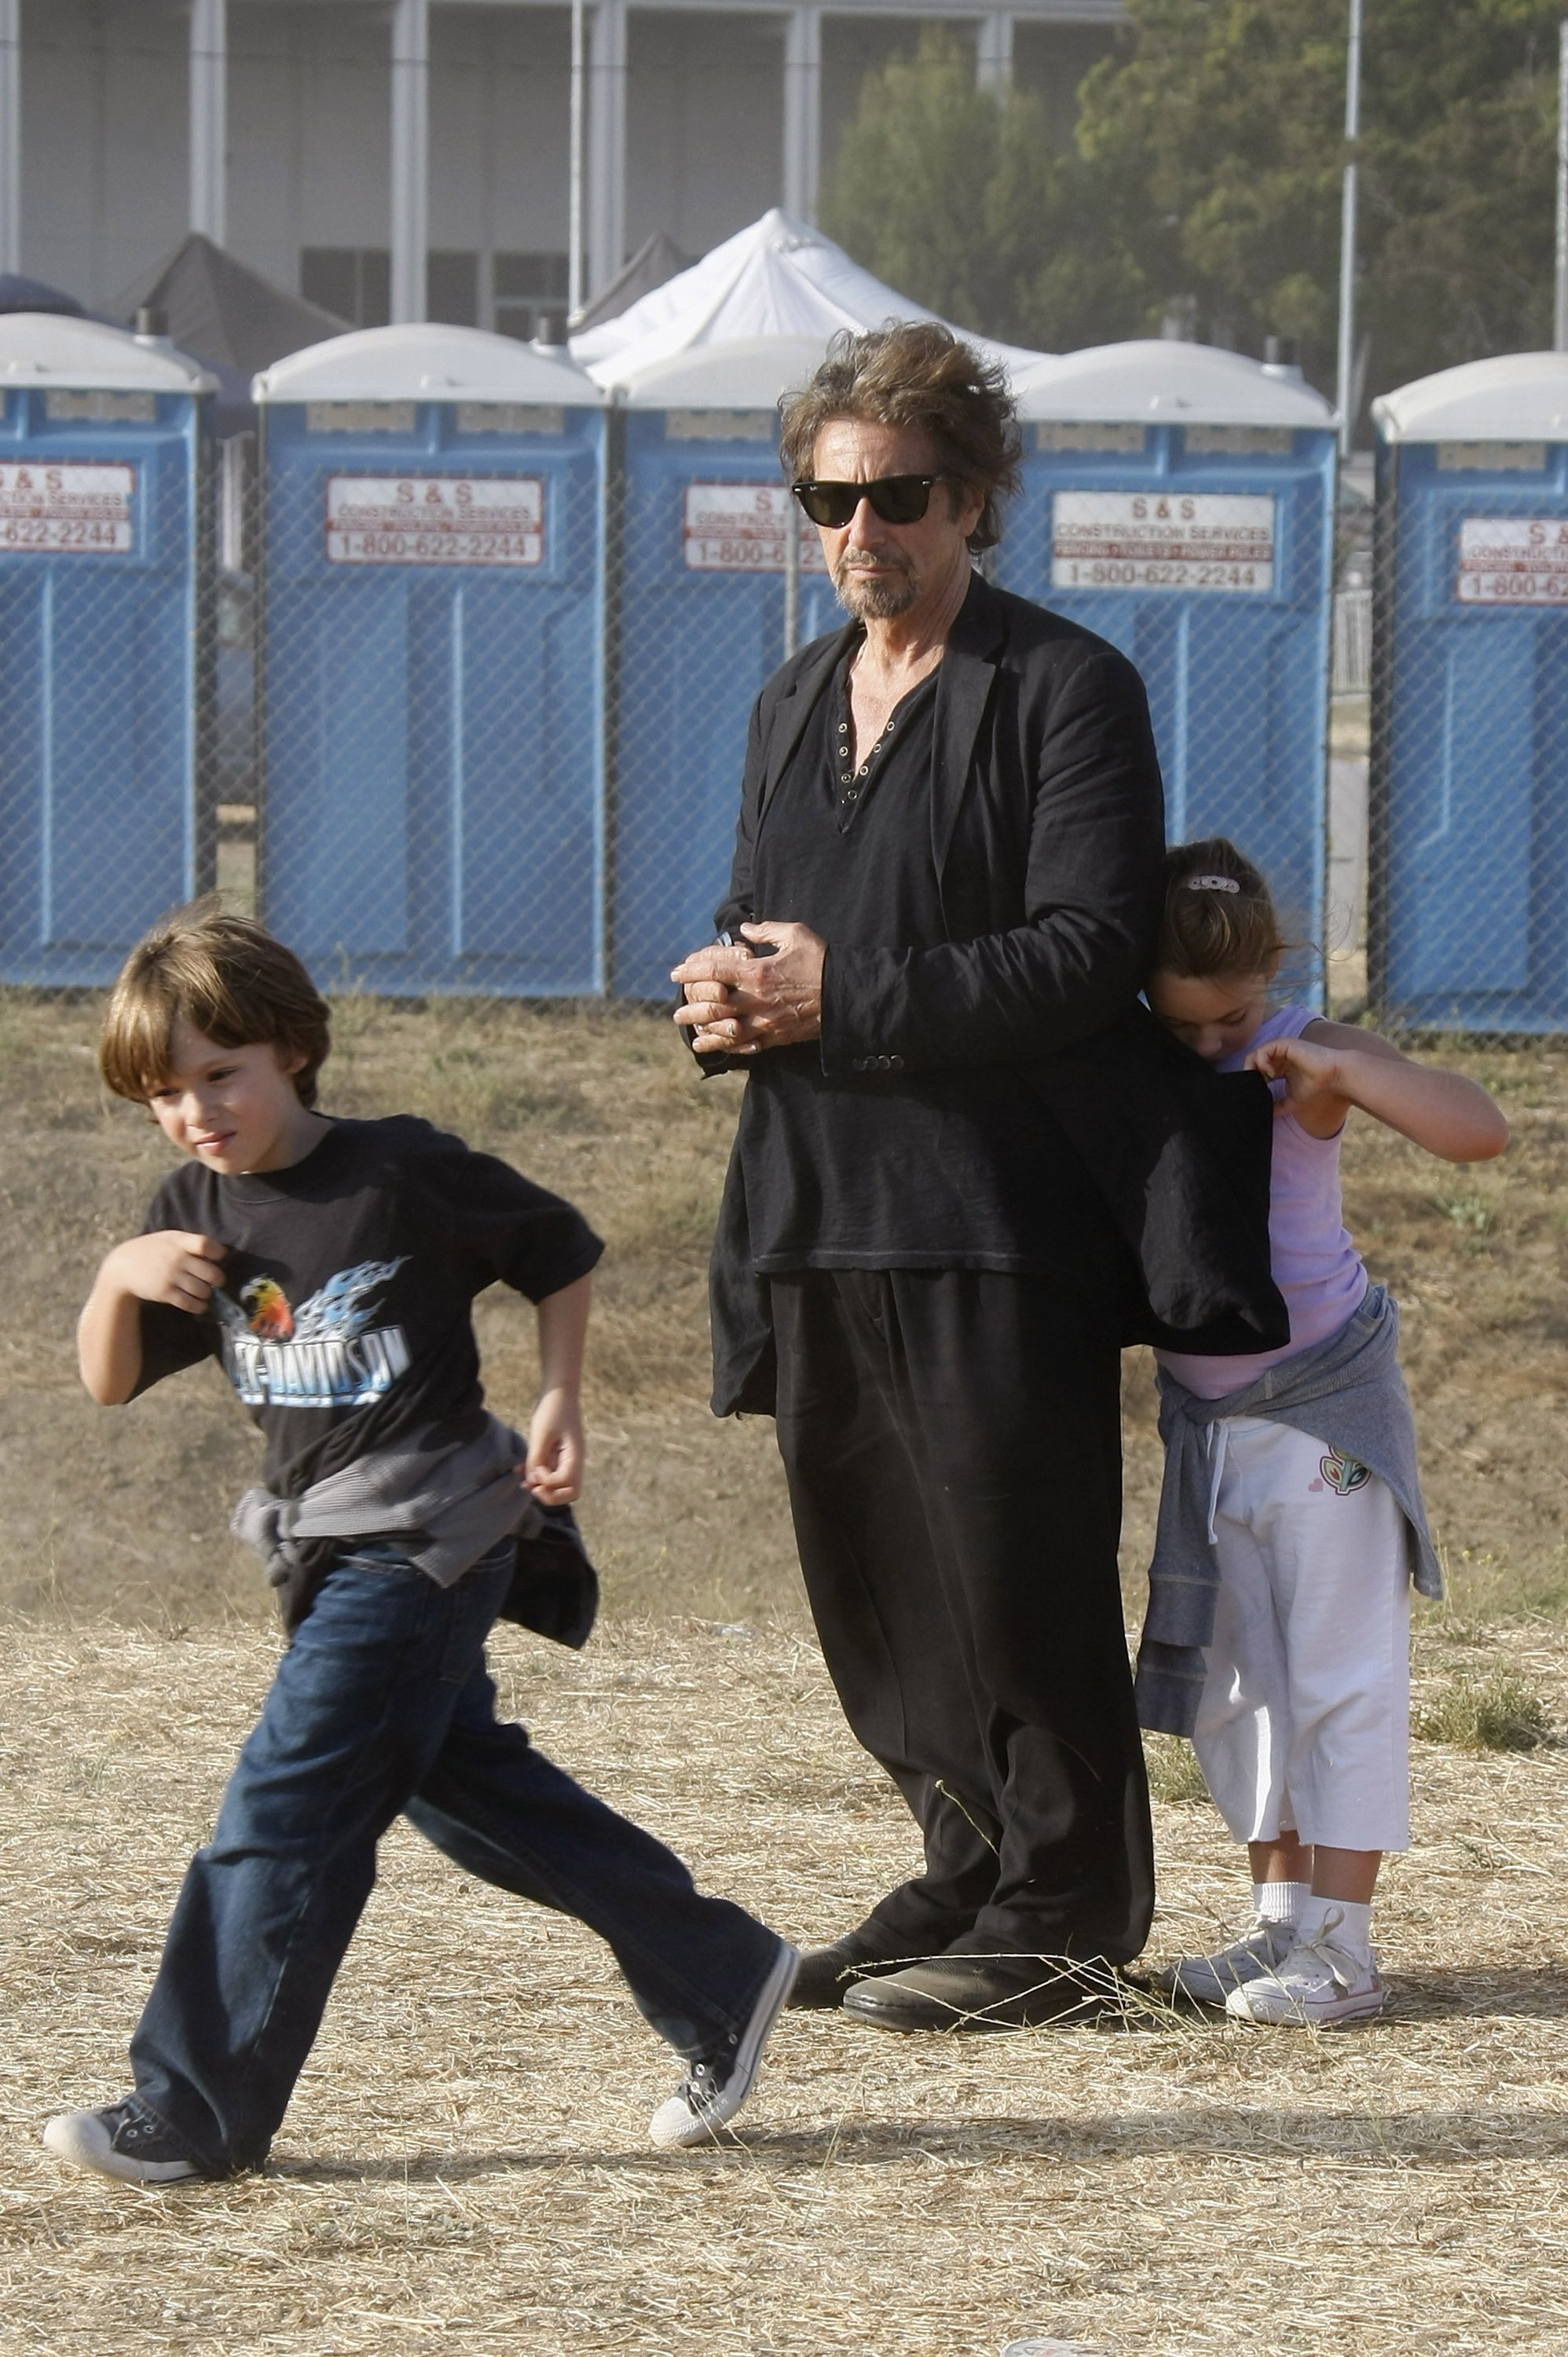 Al Pacino and his twins, son Anton James and daughter Olivia Rose in Malibu, California on August 31, 2008 | Photo: Getty Images